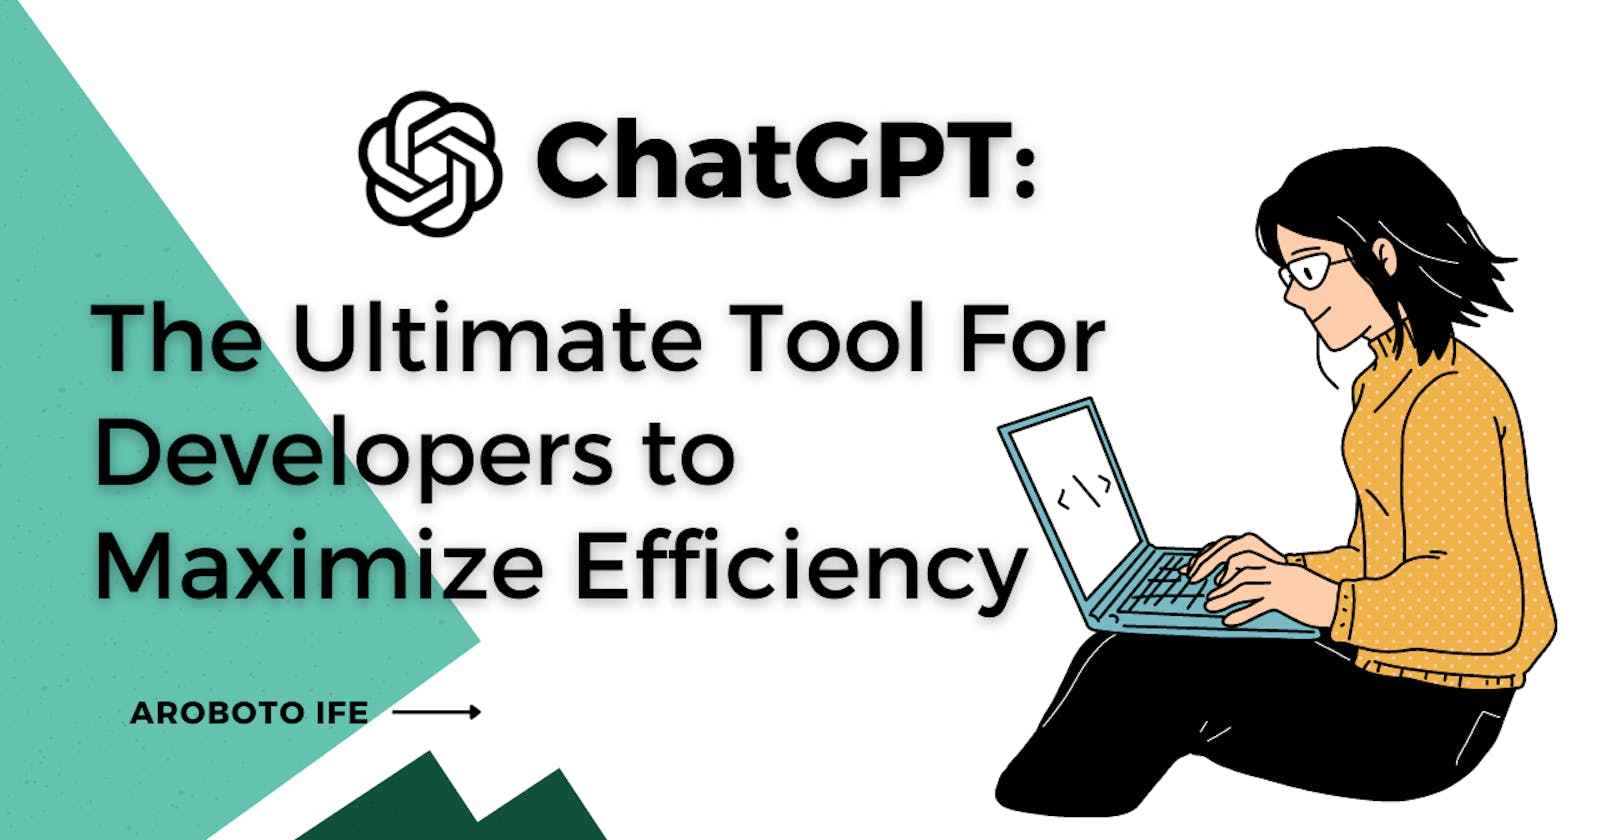 ChatGPT: The Ultimate Tool for Developers to Maximize Efficiency